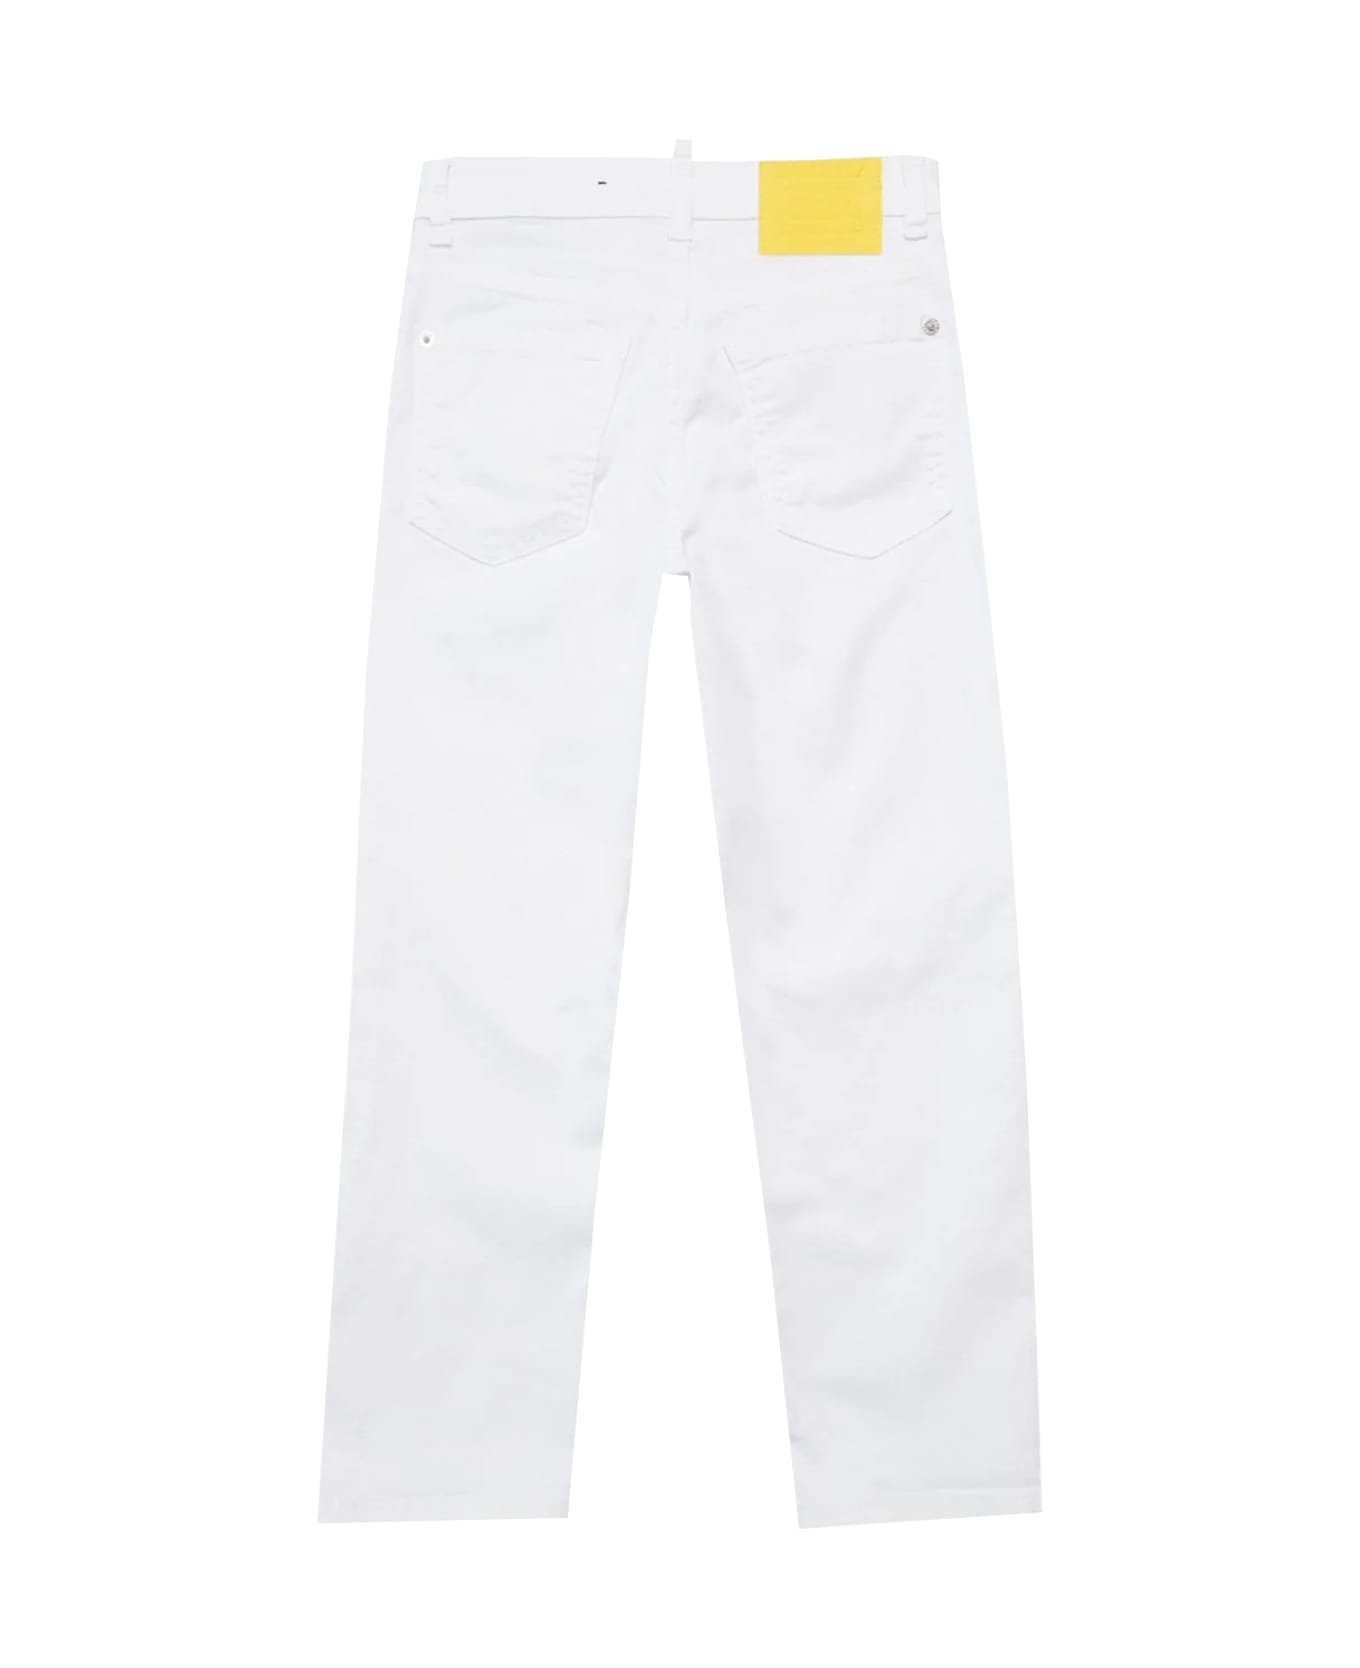 Dsquared2 Stretch Cotton Pants - White ボトムス